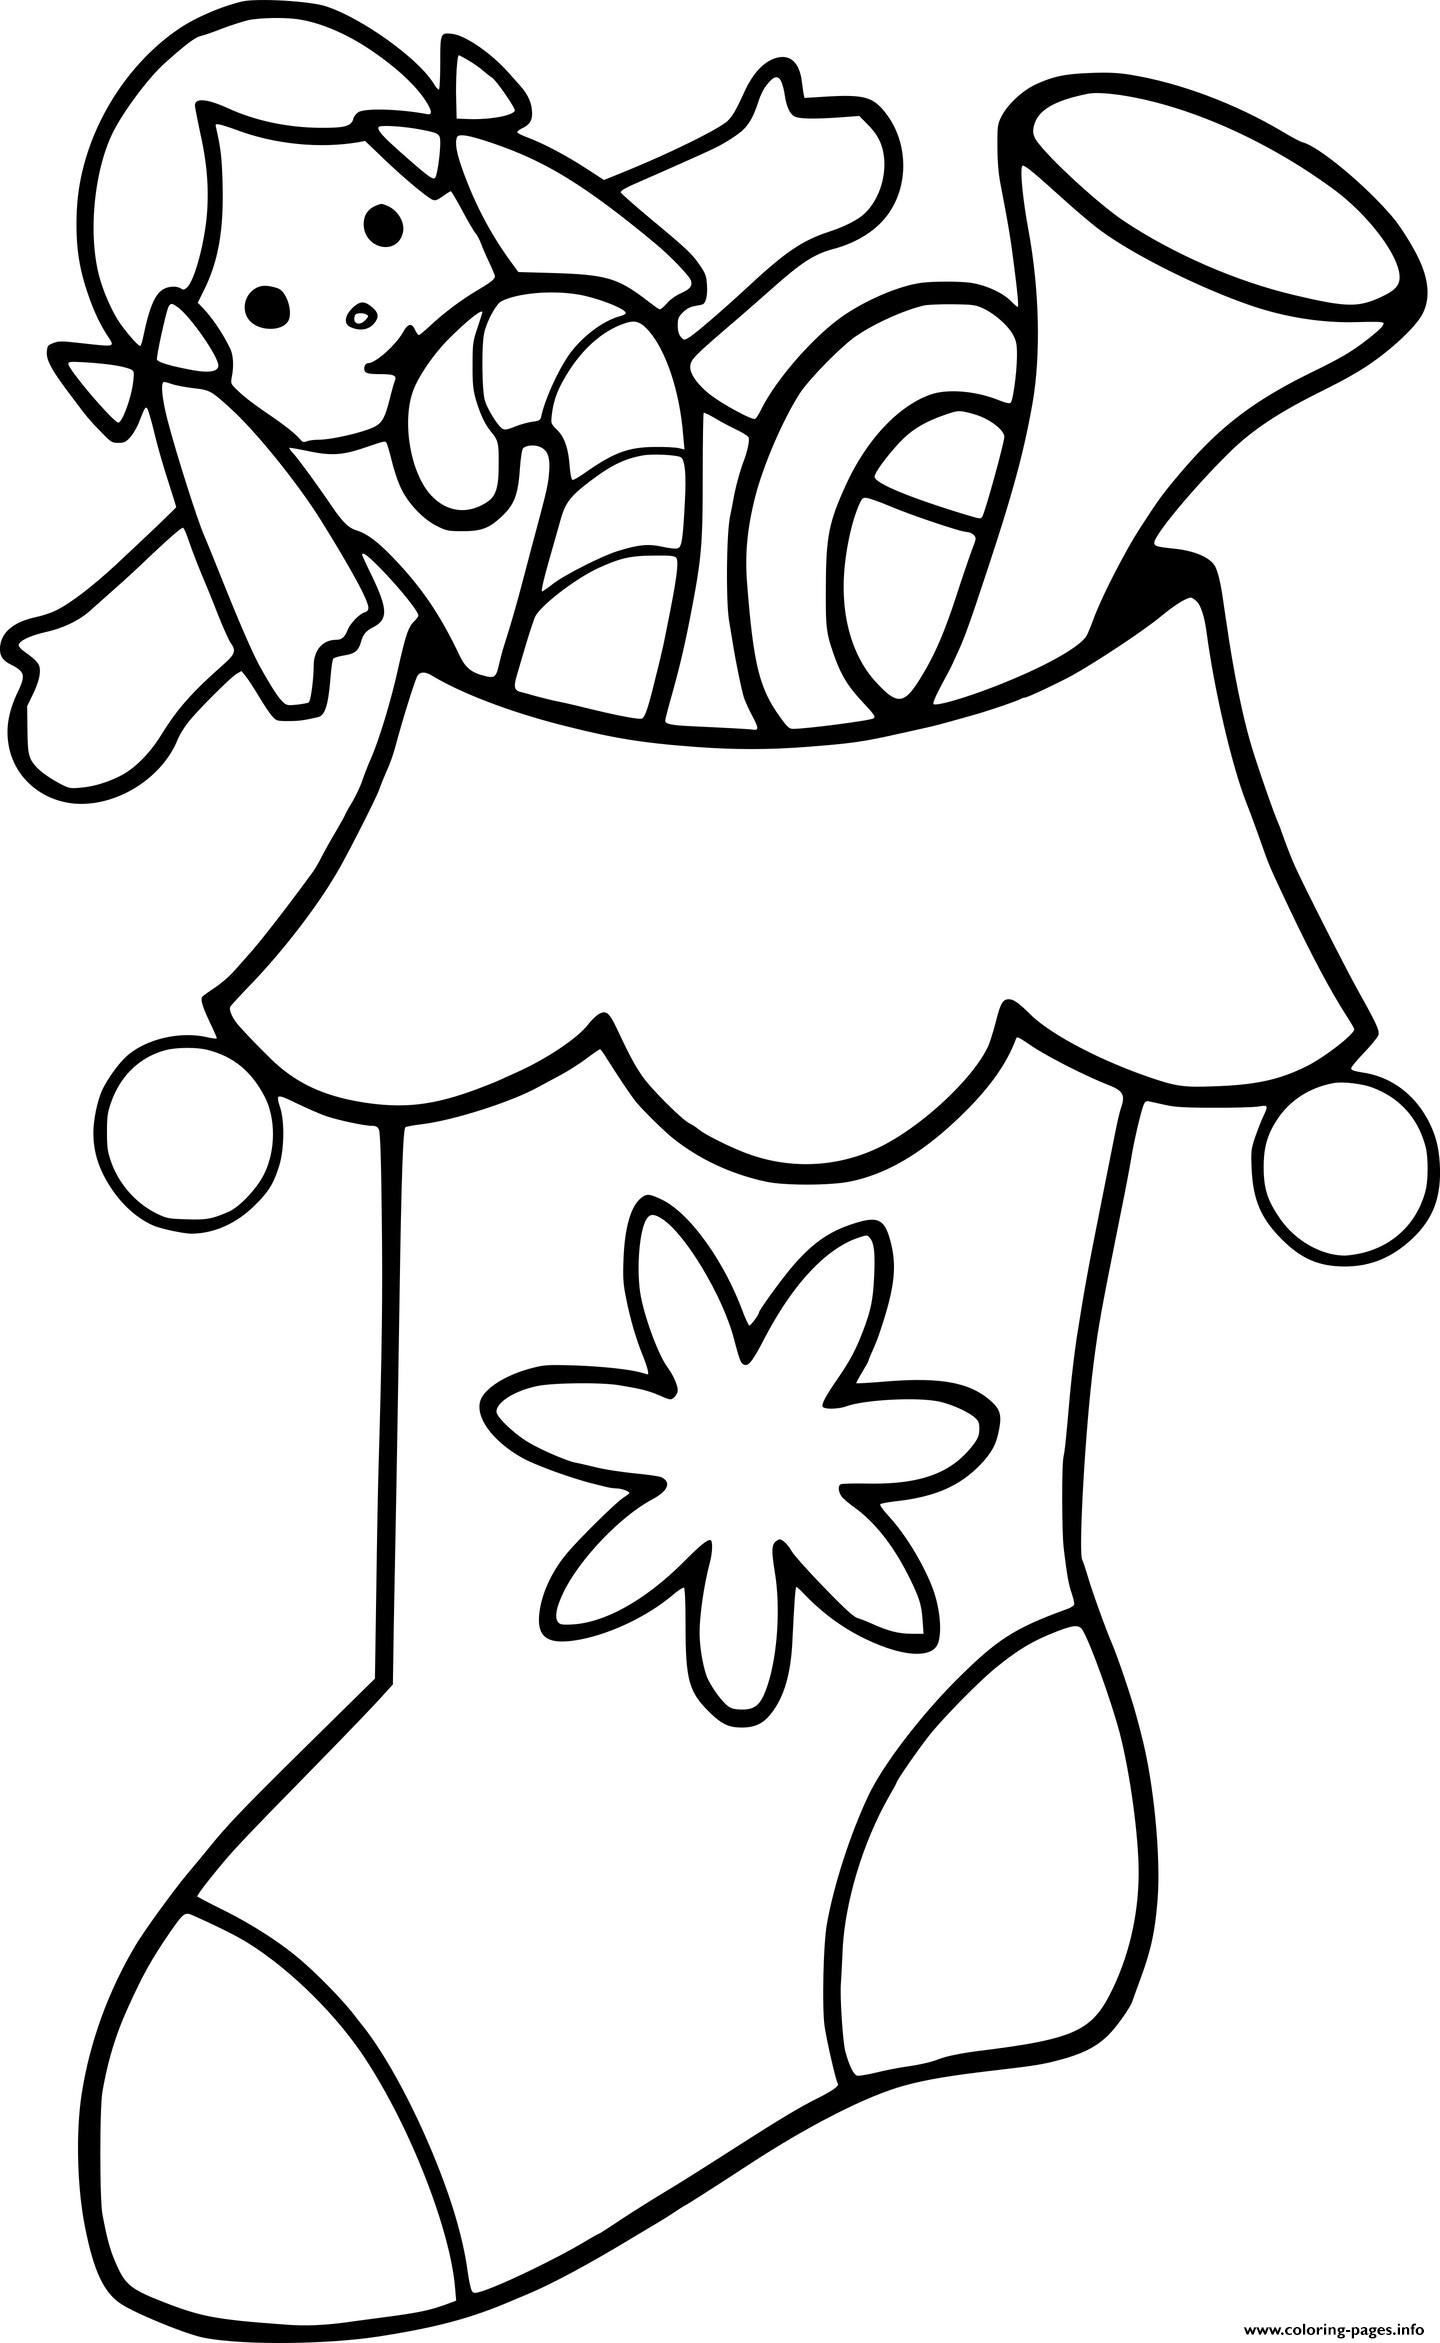 Girl Doll In Stocking Coloring page Printable